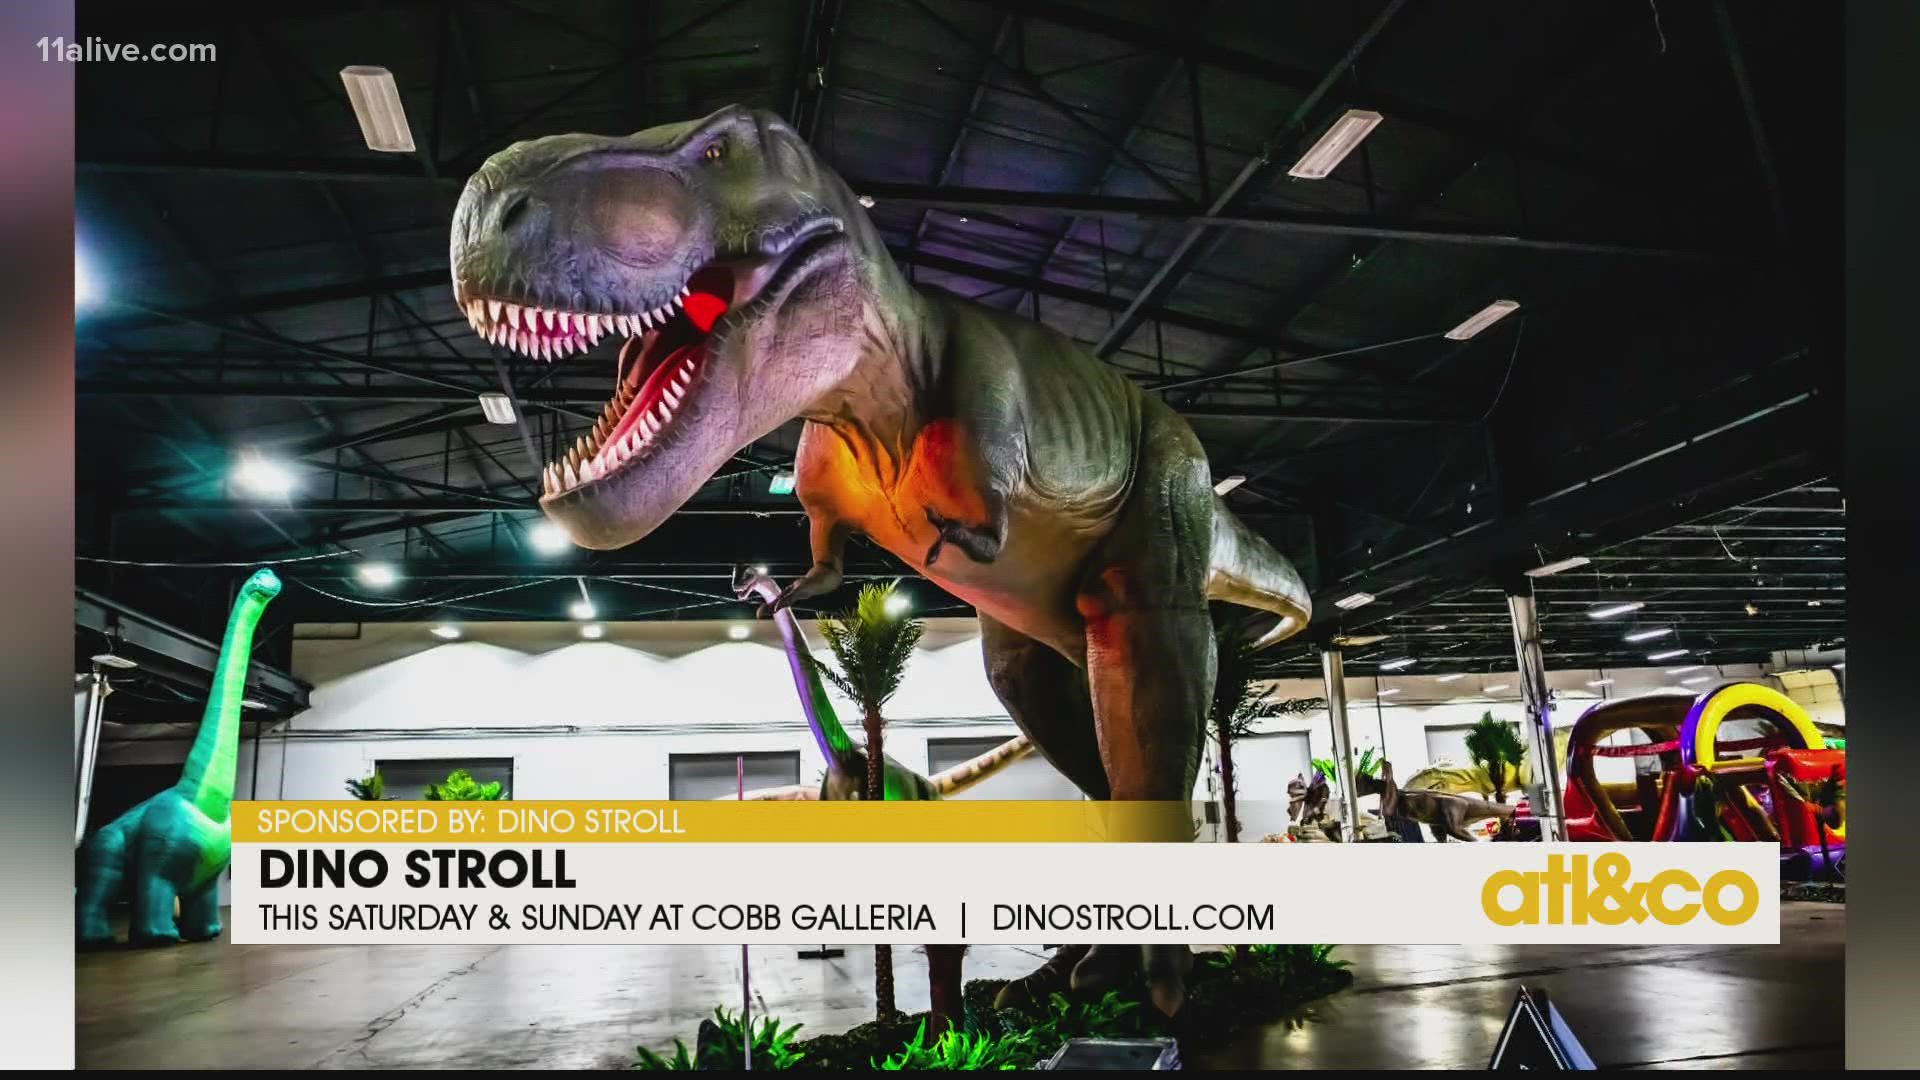 Check out the lifelike Dino Stroll tour for the ultimate walk-thru experience at Cobb Galleria this weekend! Use code "ATL&CO" for a 10% discount at dinostroll.com